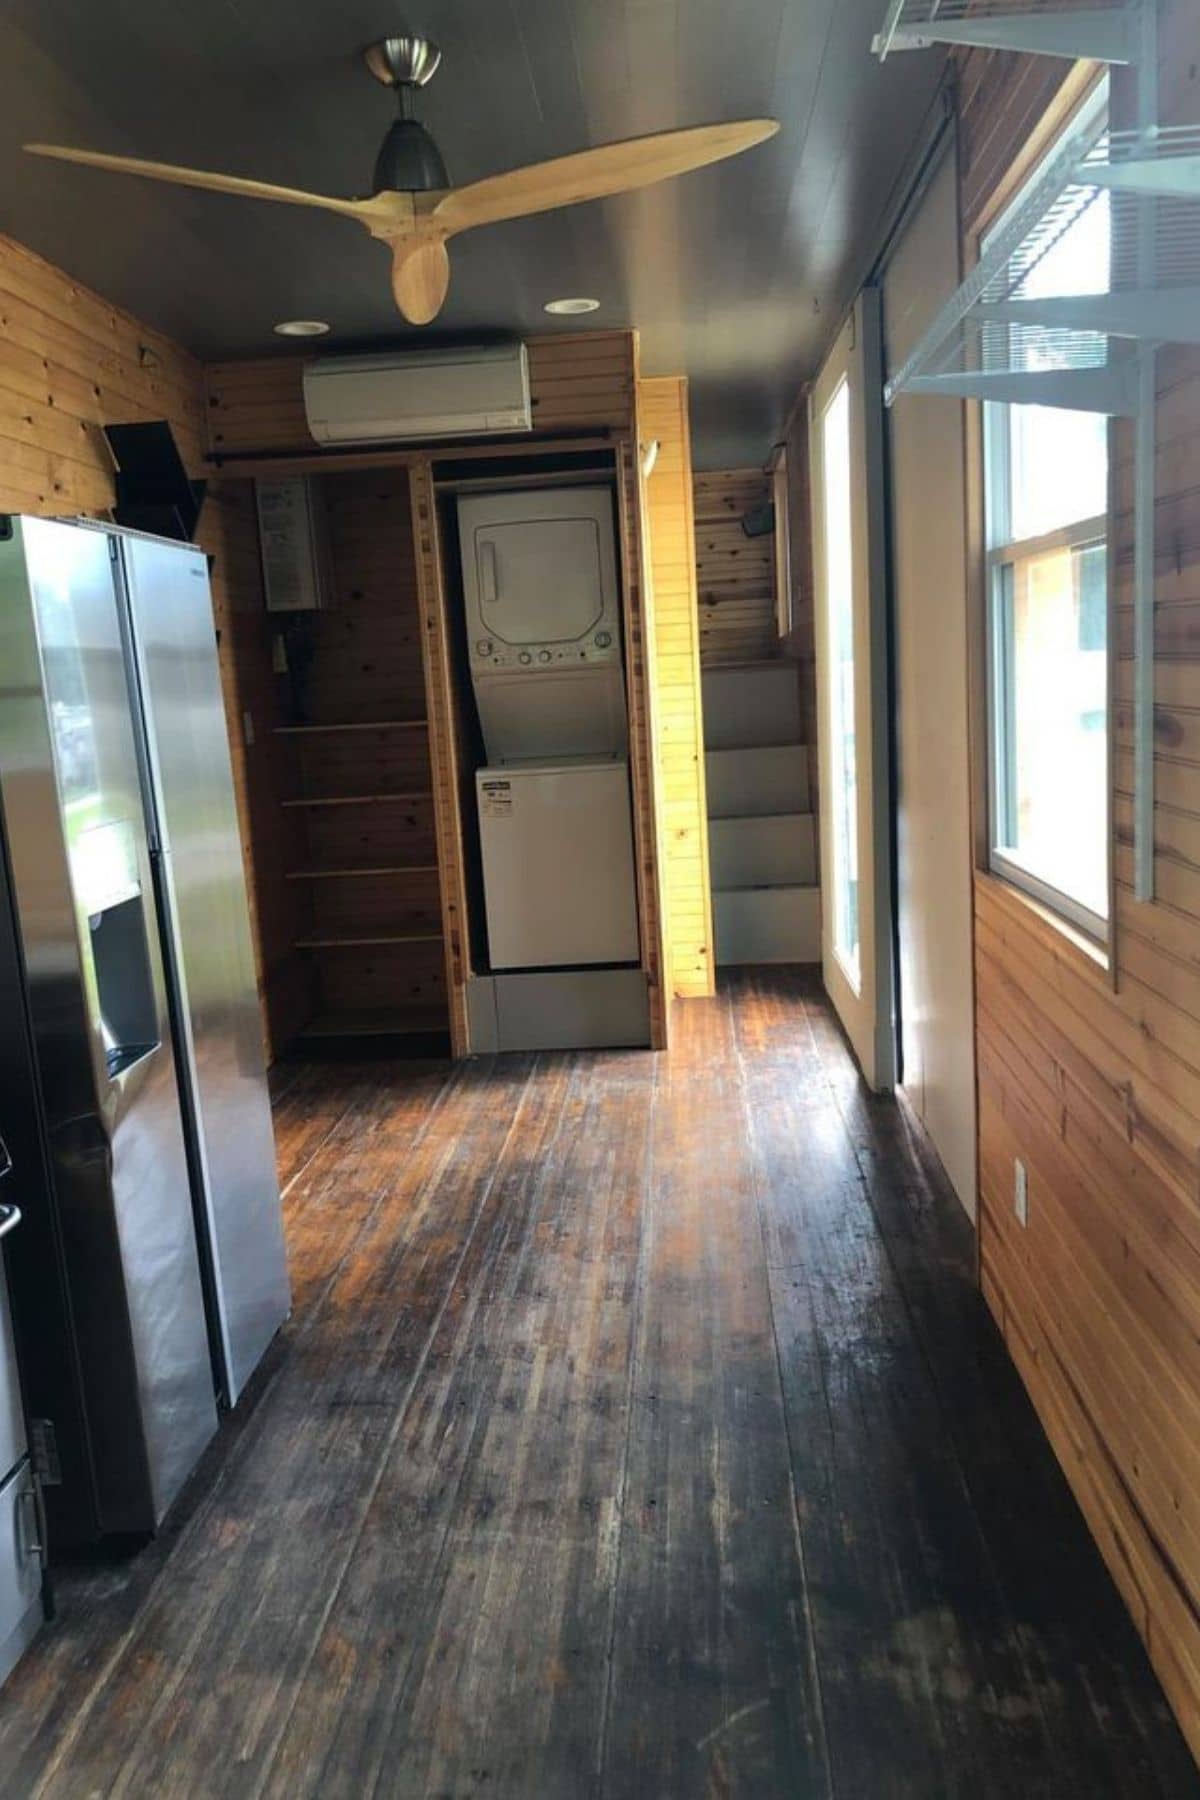 View looking into tiny home showing laundry stack at back of room